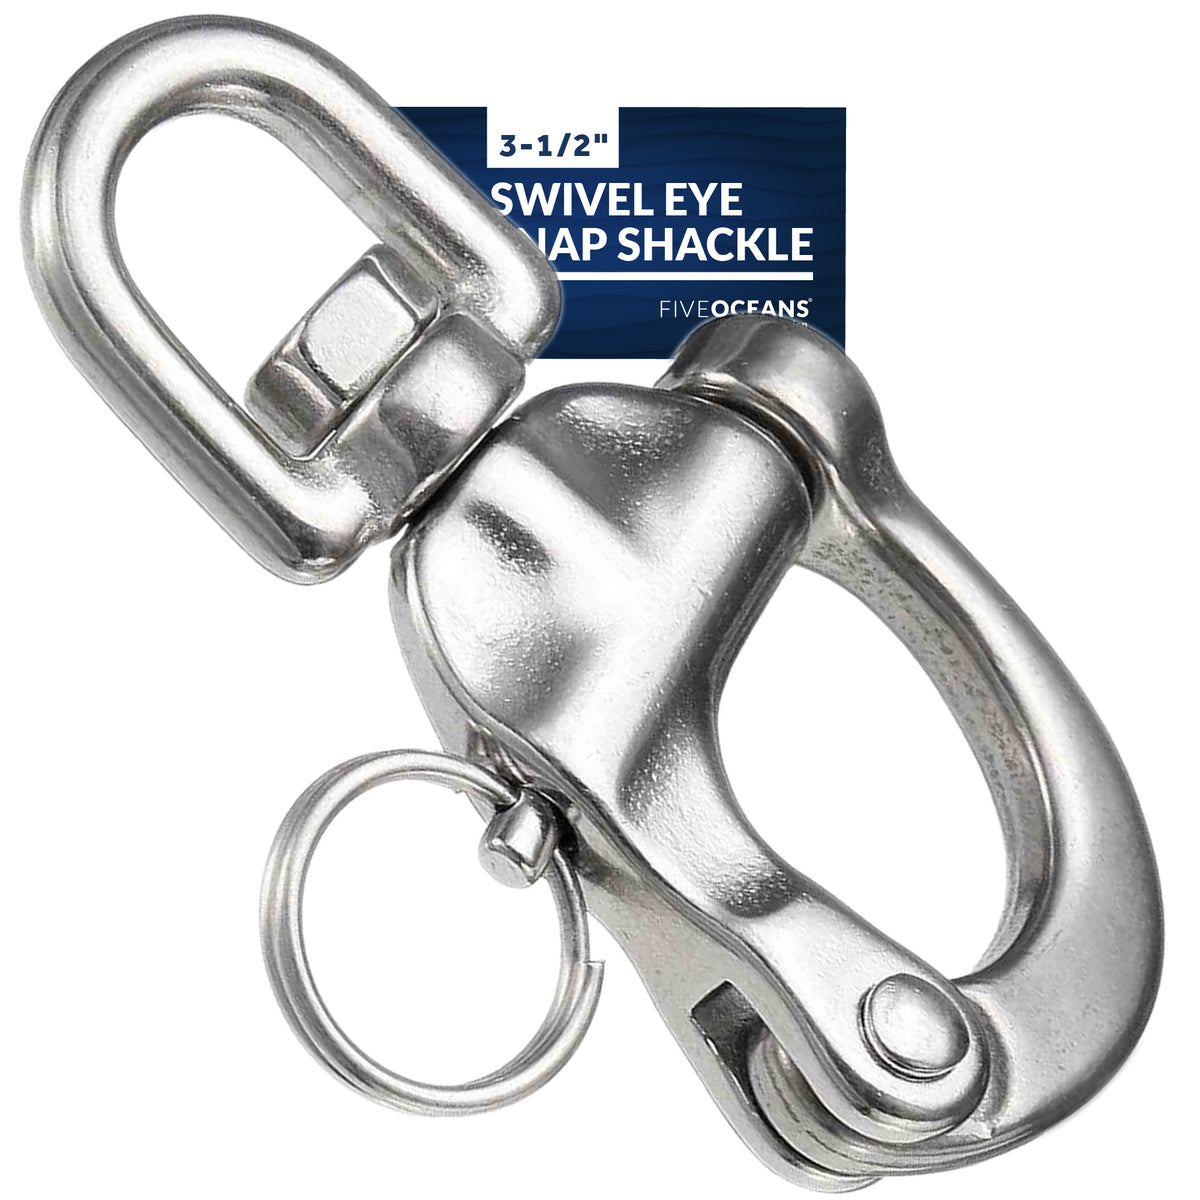 3 1/2 and 5 Five Oceans Stainless Steel Swivel Eye Snap Bail Shackle 2 3/4 